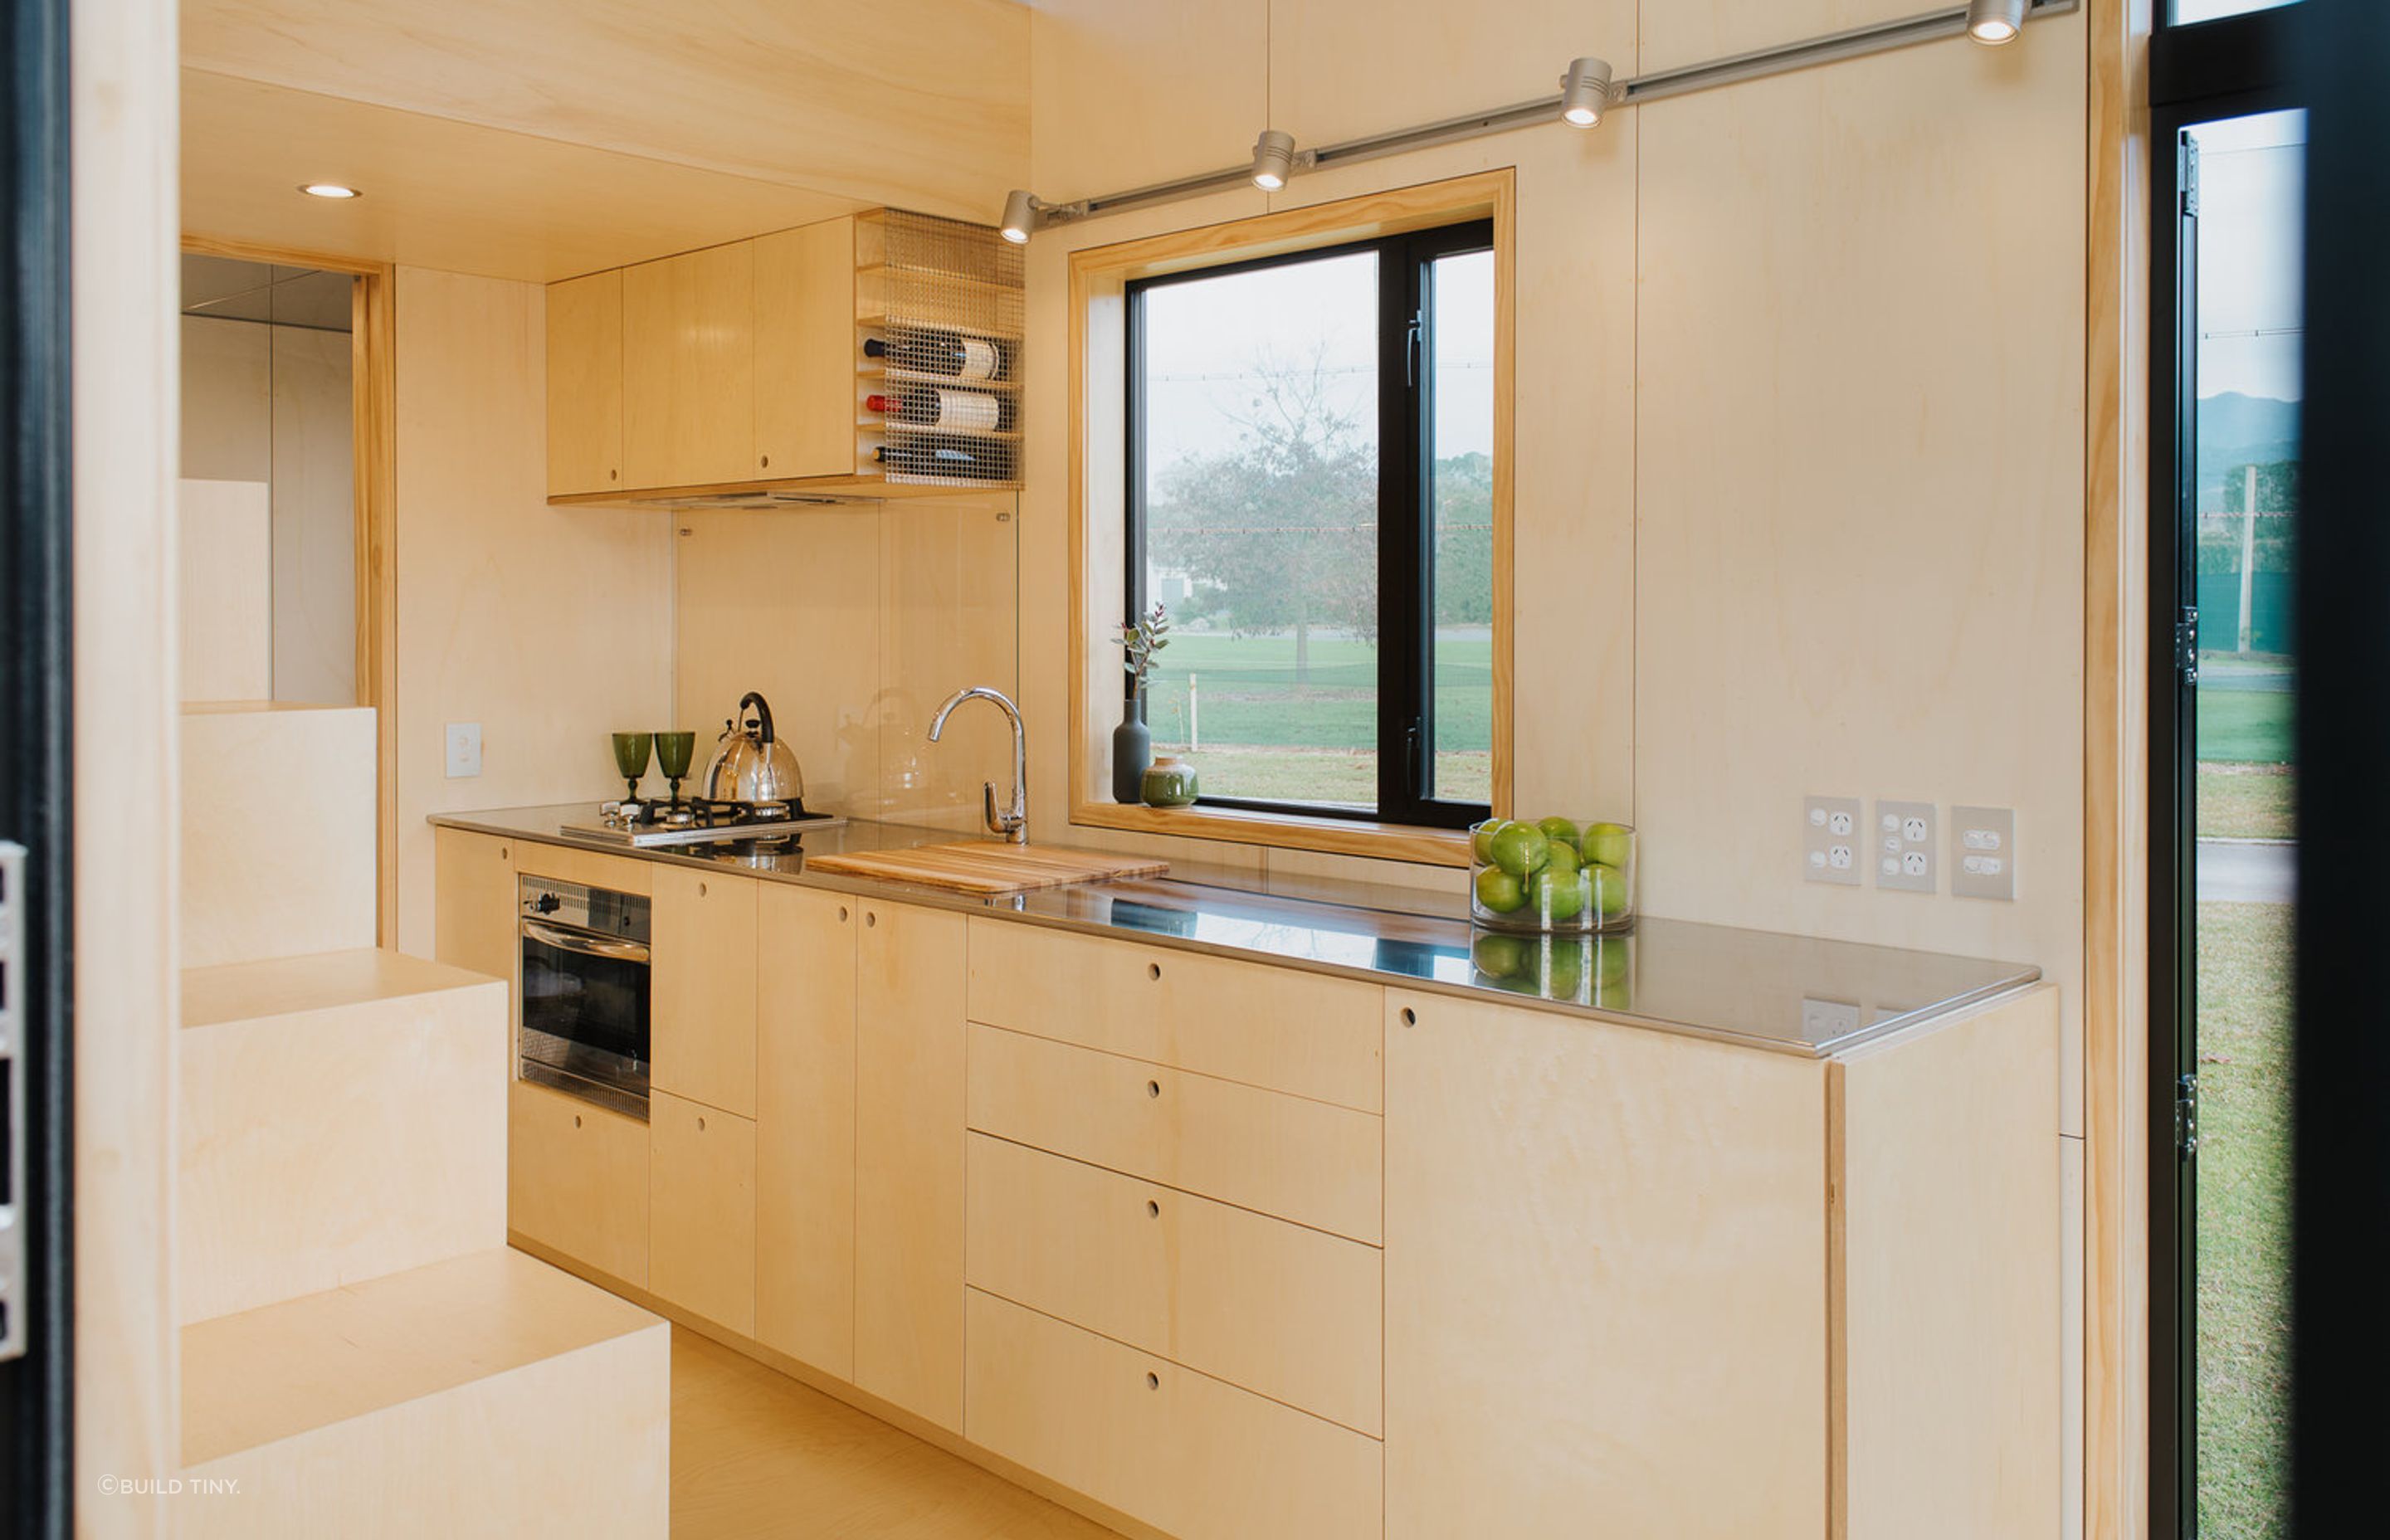 The generous kitchen (for a tiny house) gives the owner plenty of space to enjoy baking. Photography supplied by Build Tiny.